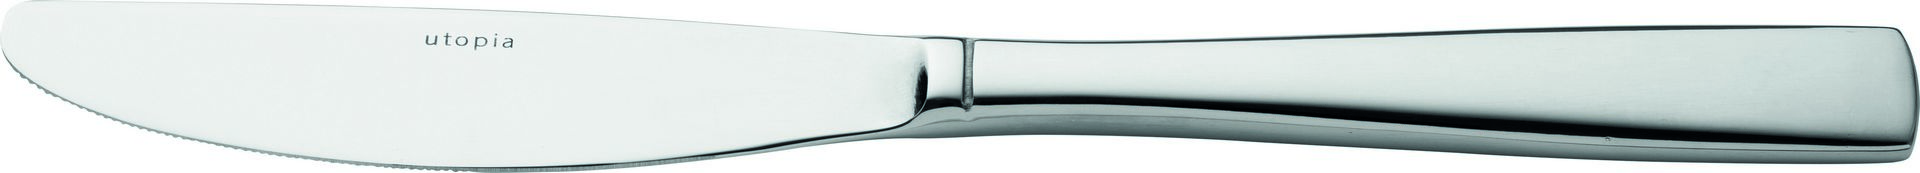 Strauss Table Knife - F39000-A00000-B01012 (Pack of 12)